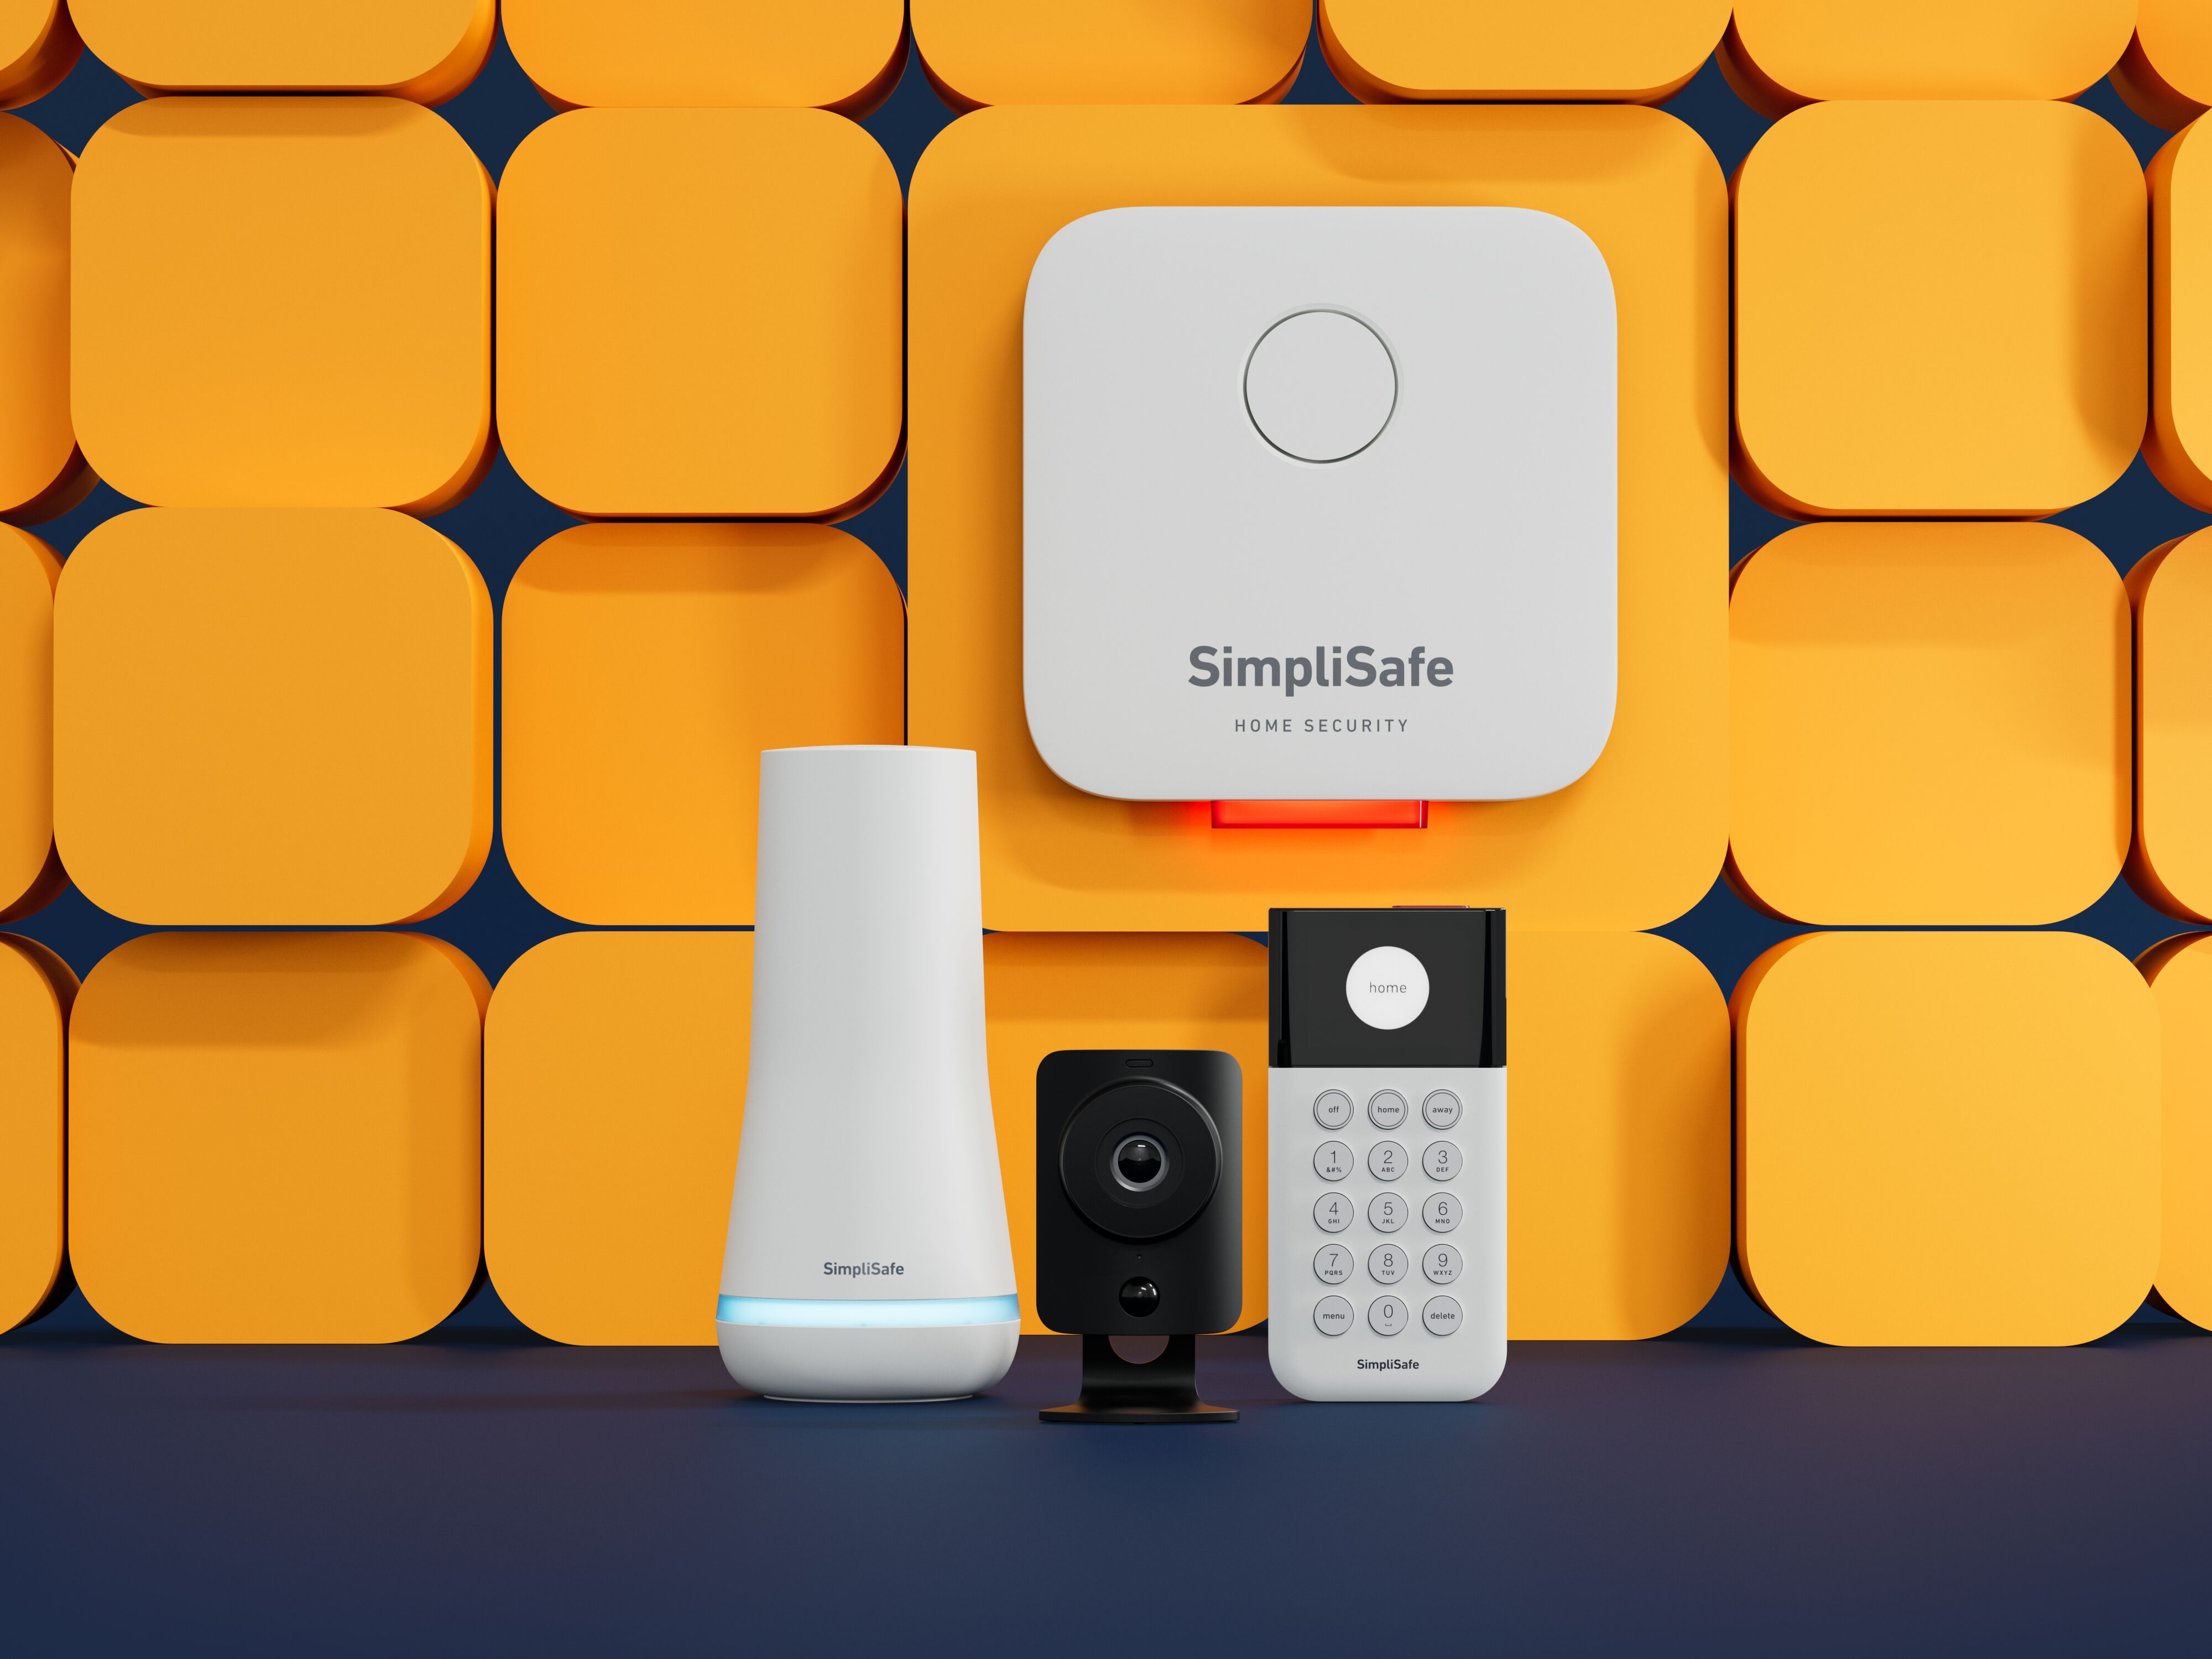 SimpliSafe home security product